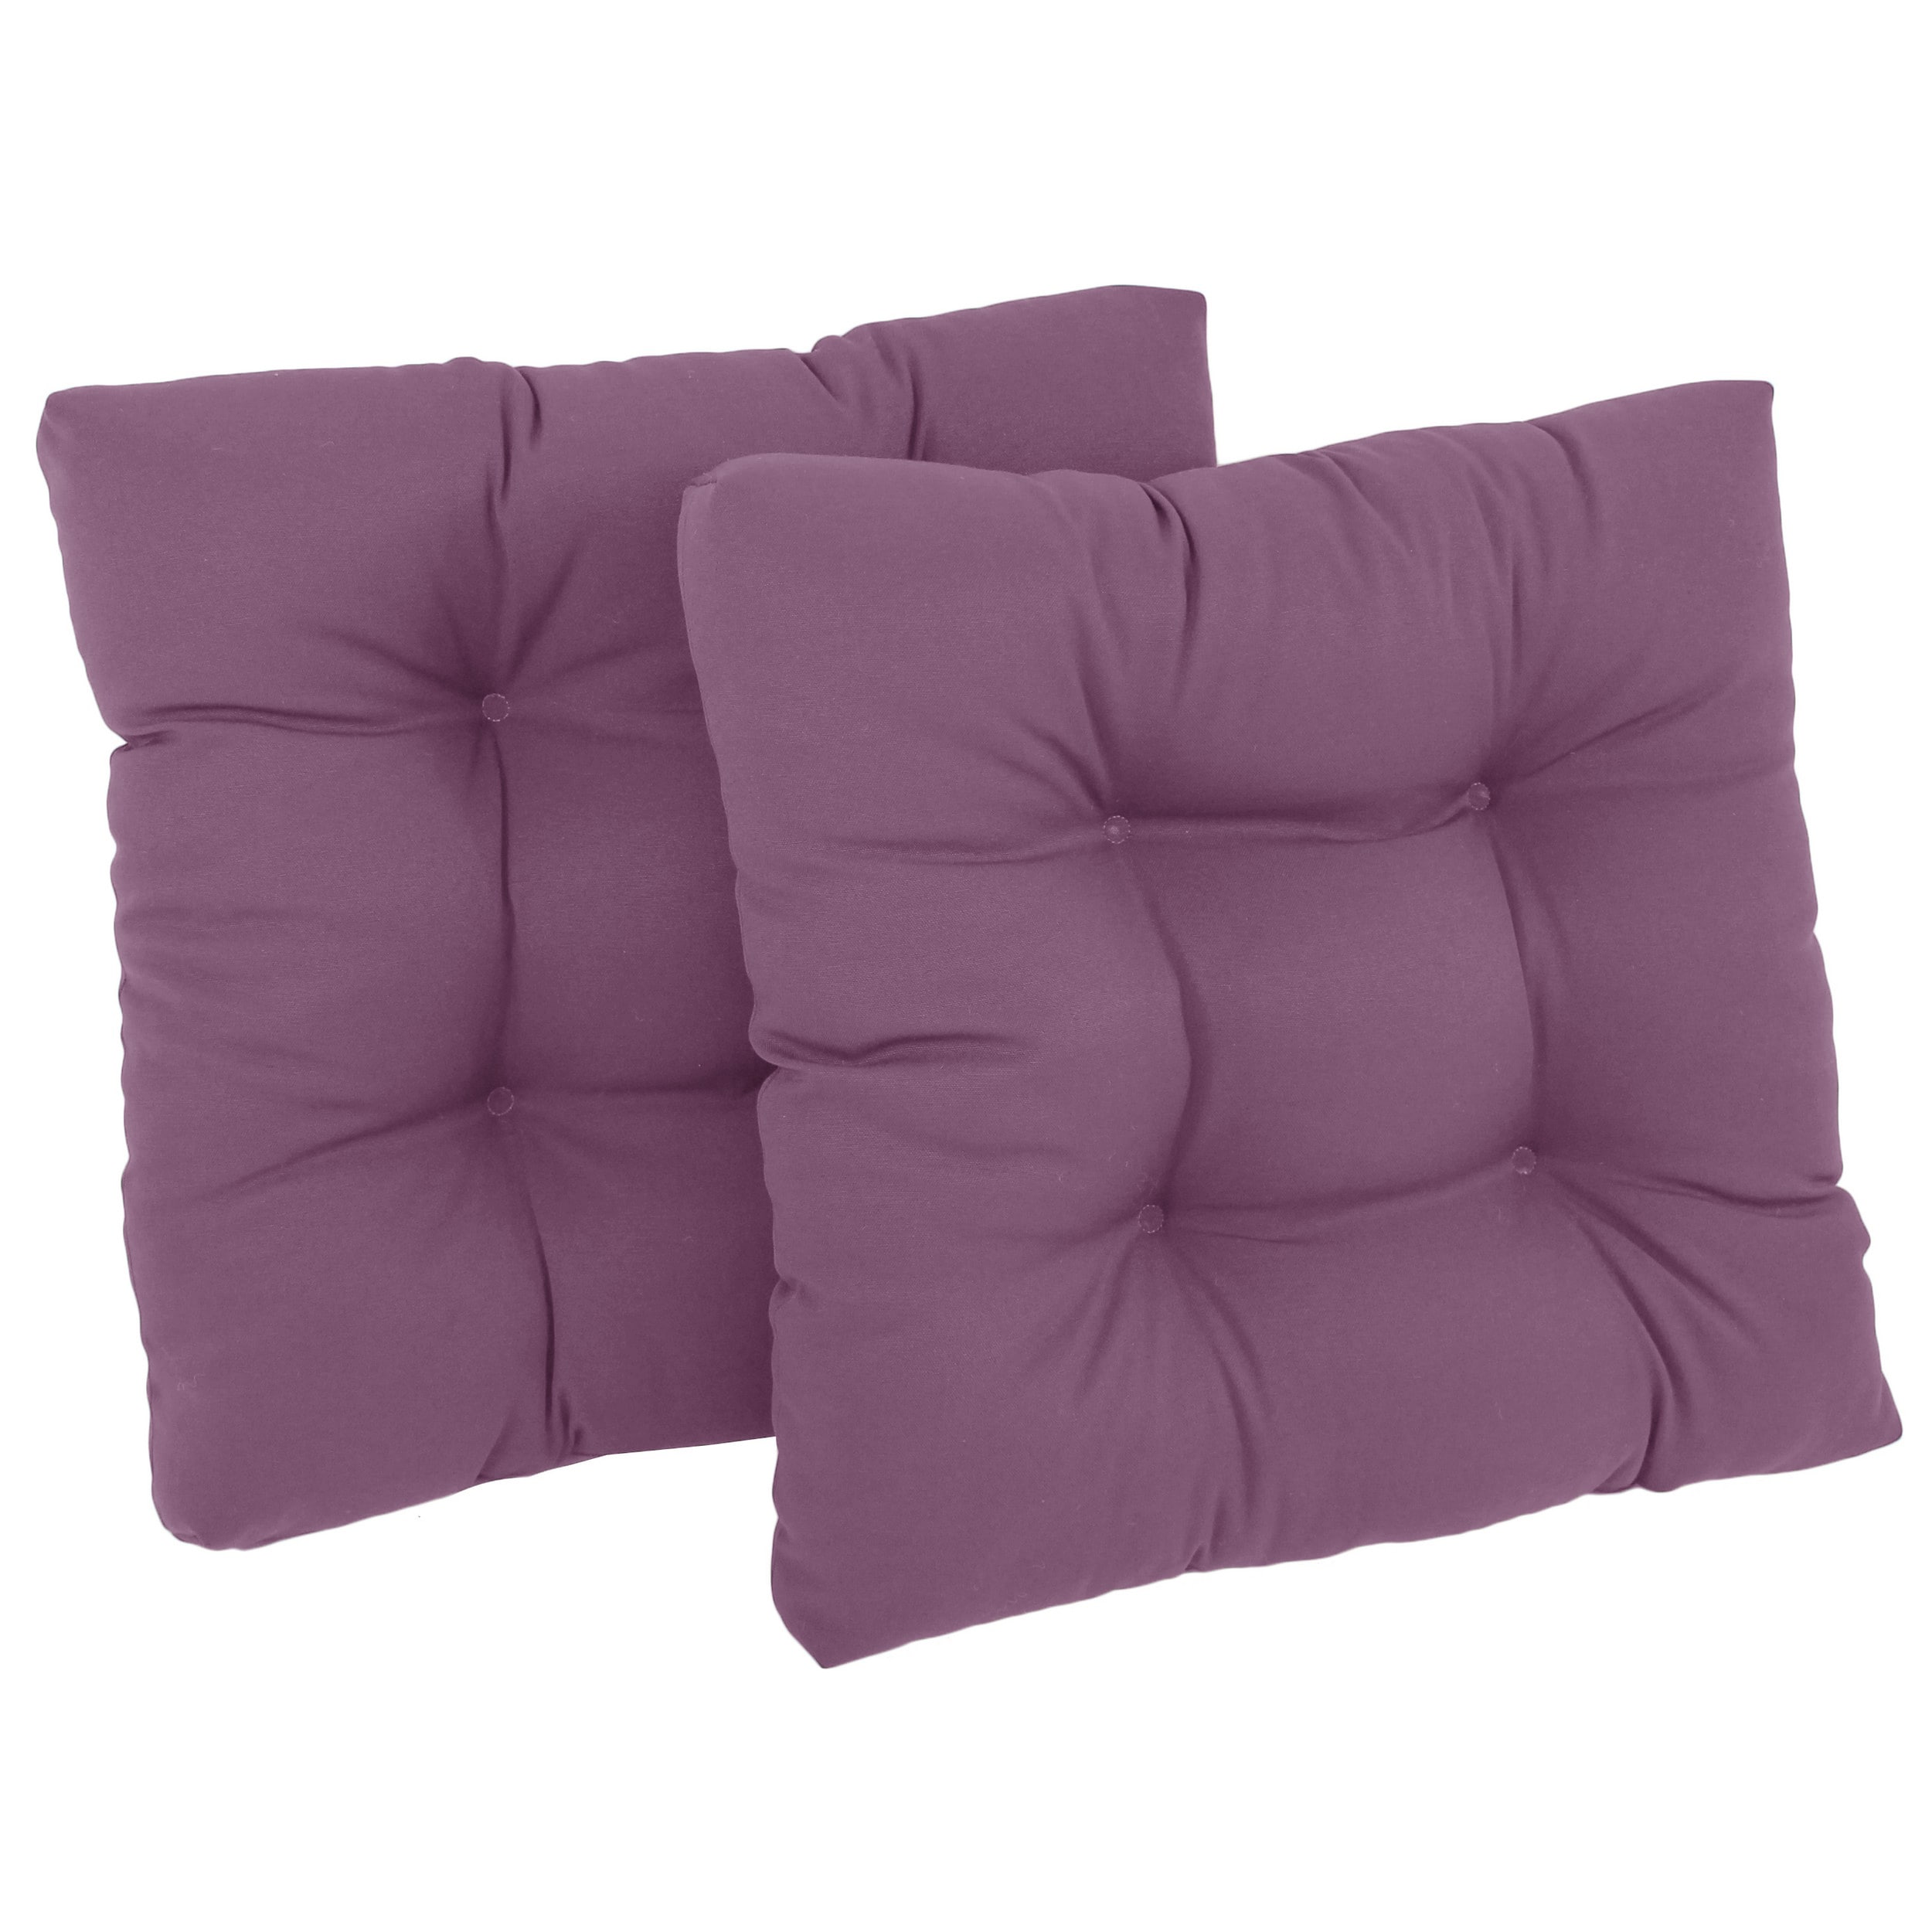 Blazing Needles 16-Inch Solid Twill U-shaped Chair Cushions - Set of 2, Grape, Indoor, Tufted Design, Made in USA